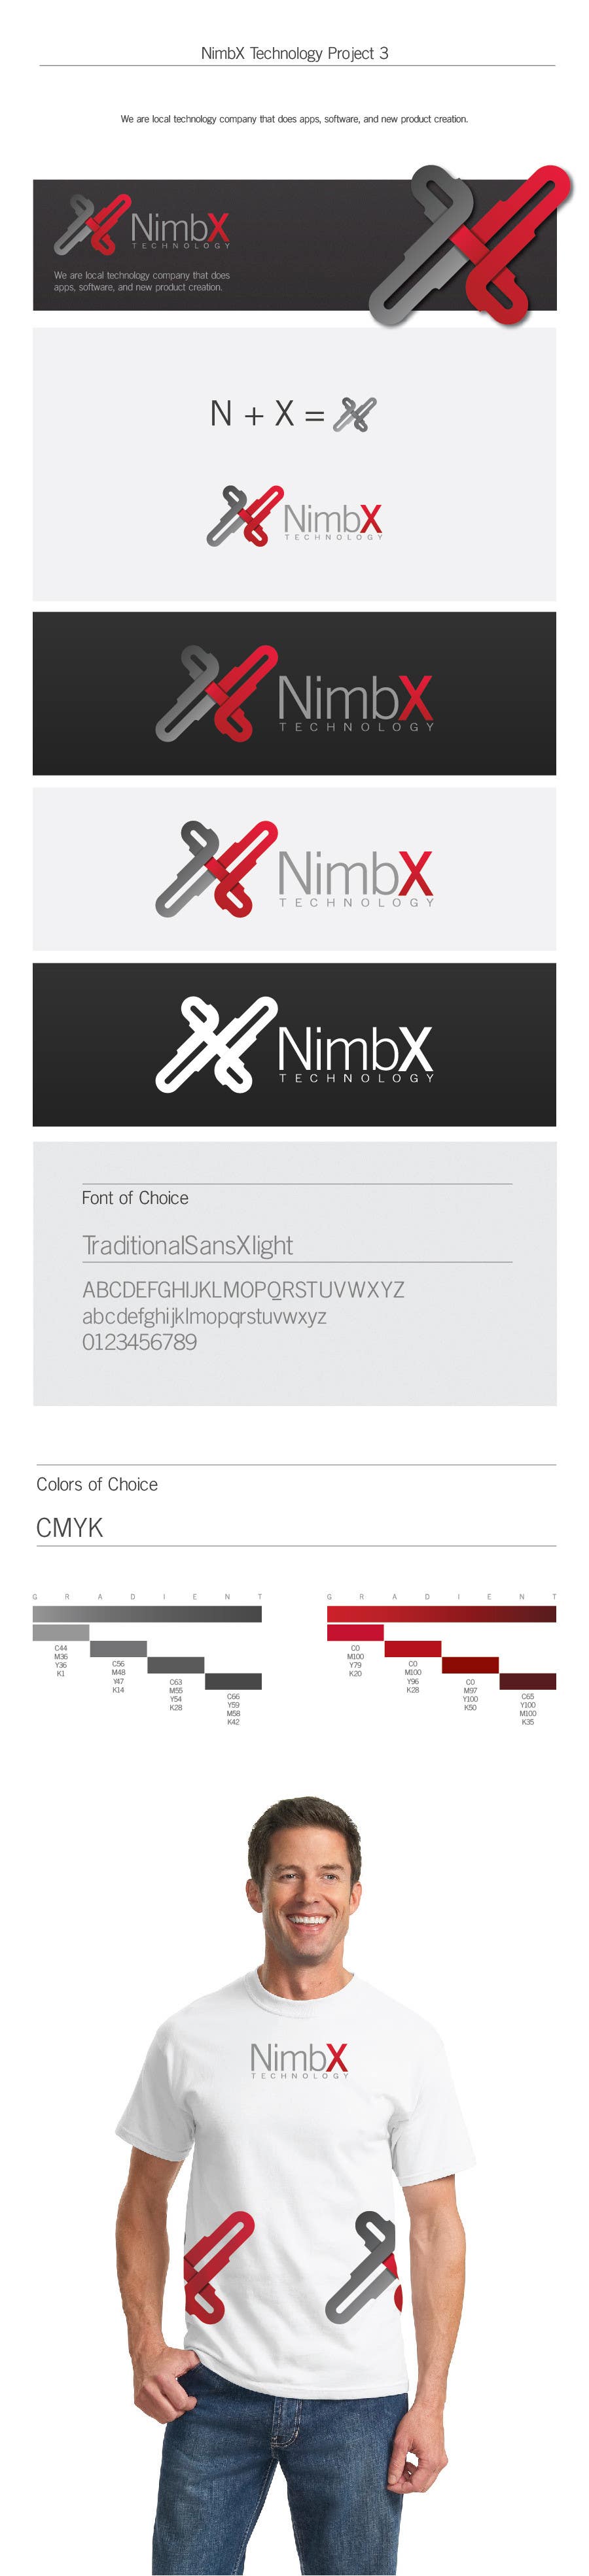 Contest Entry #237 for                                                 NimbX Technology Logo Contest
                                            